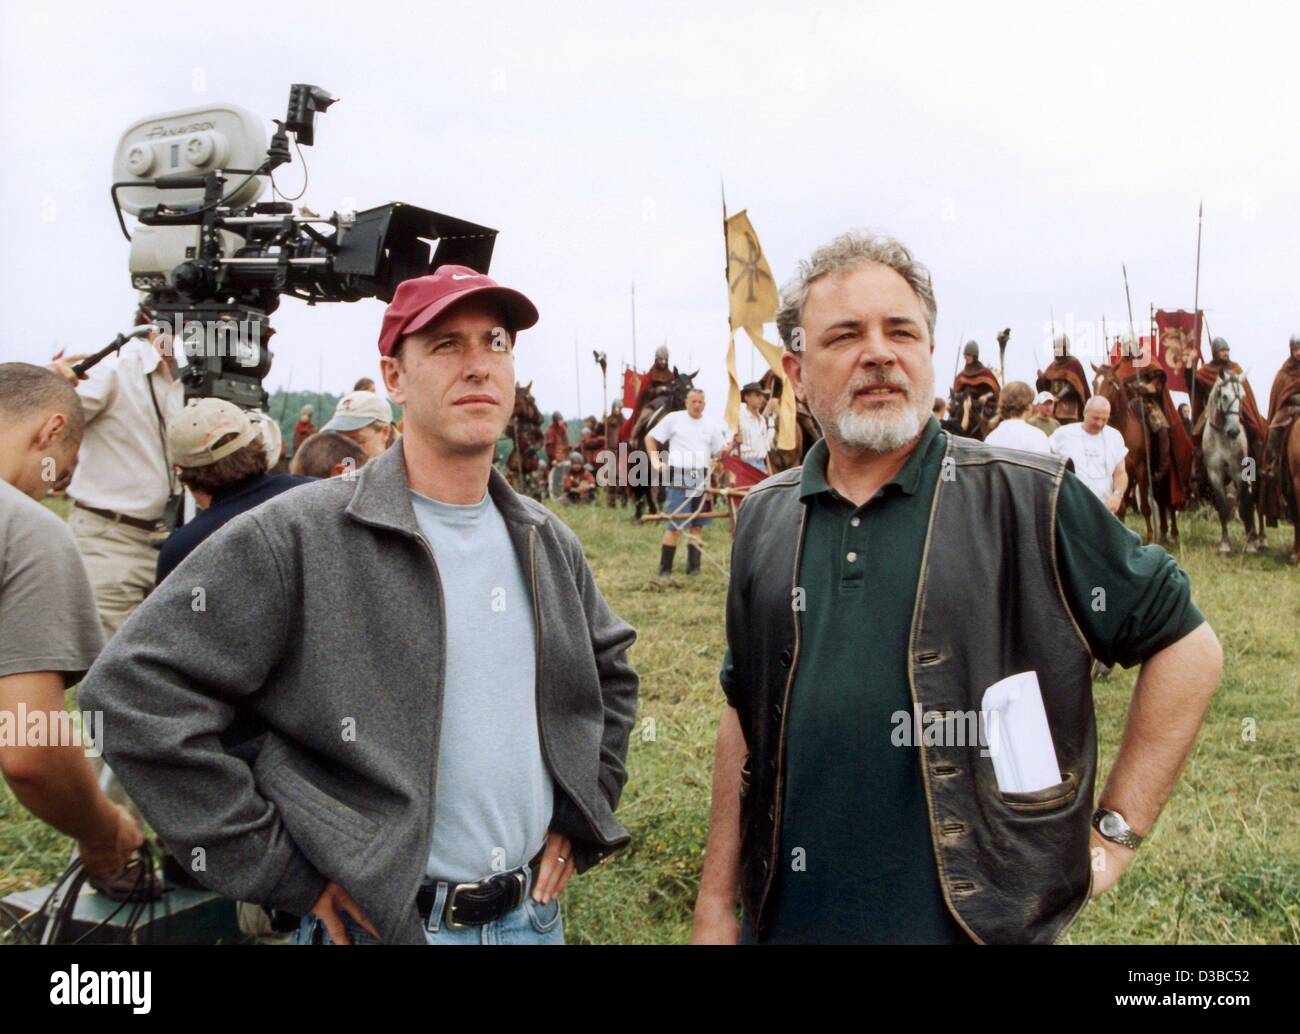 (dpa files) - German film director Uli Edel (R) and Producer Mark Wolper are surrounded by knights on the movie set of the US-German co-production 'The Mists of Avalon' in Tocnik, West Bohemia/Czechia, 24 July 2000. Edel came to international fame with his movies 'Christiane F. - Wir Kinder vom Bahn Stock Photo